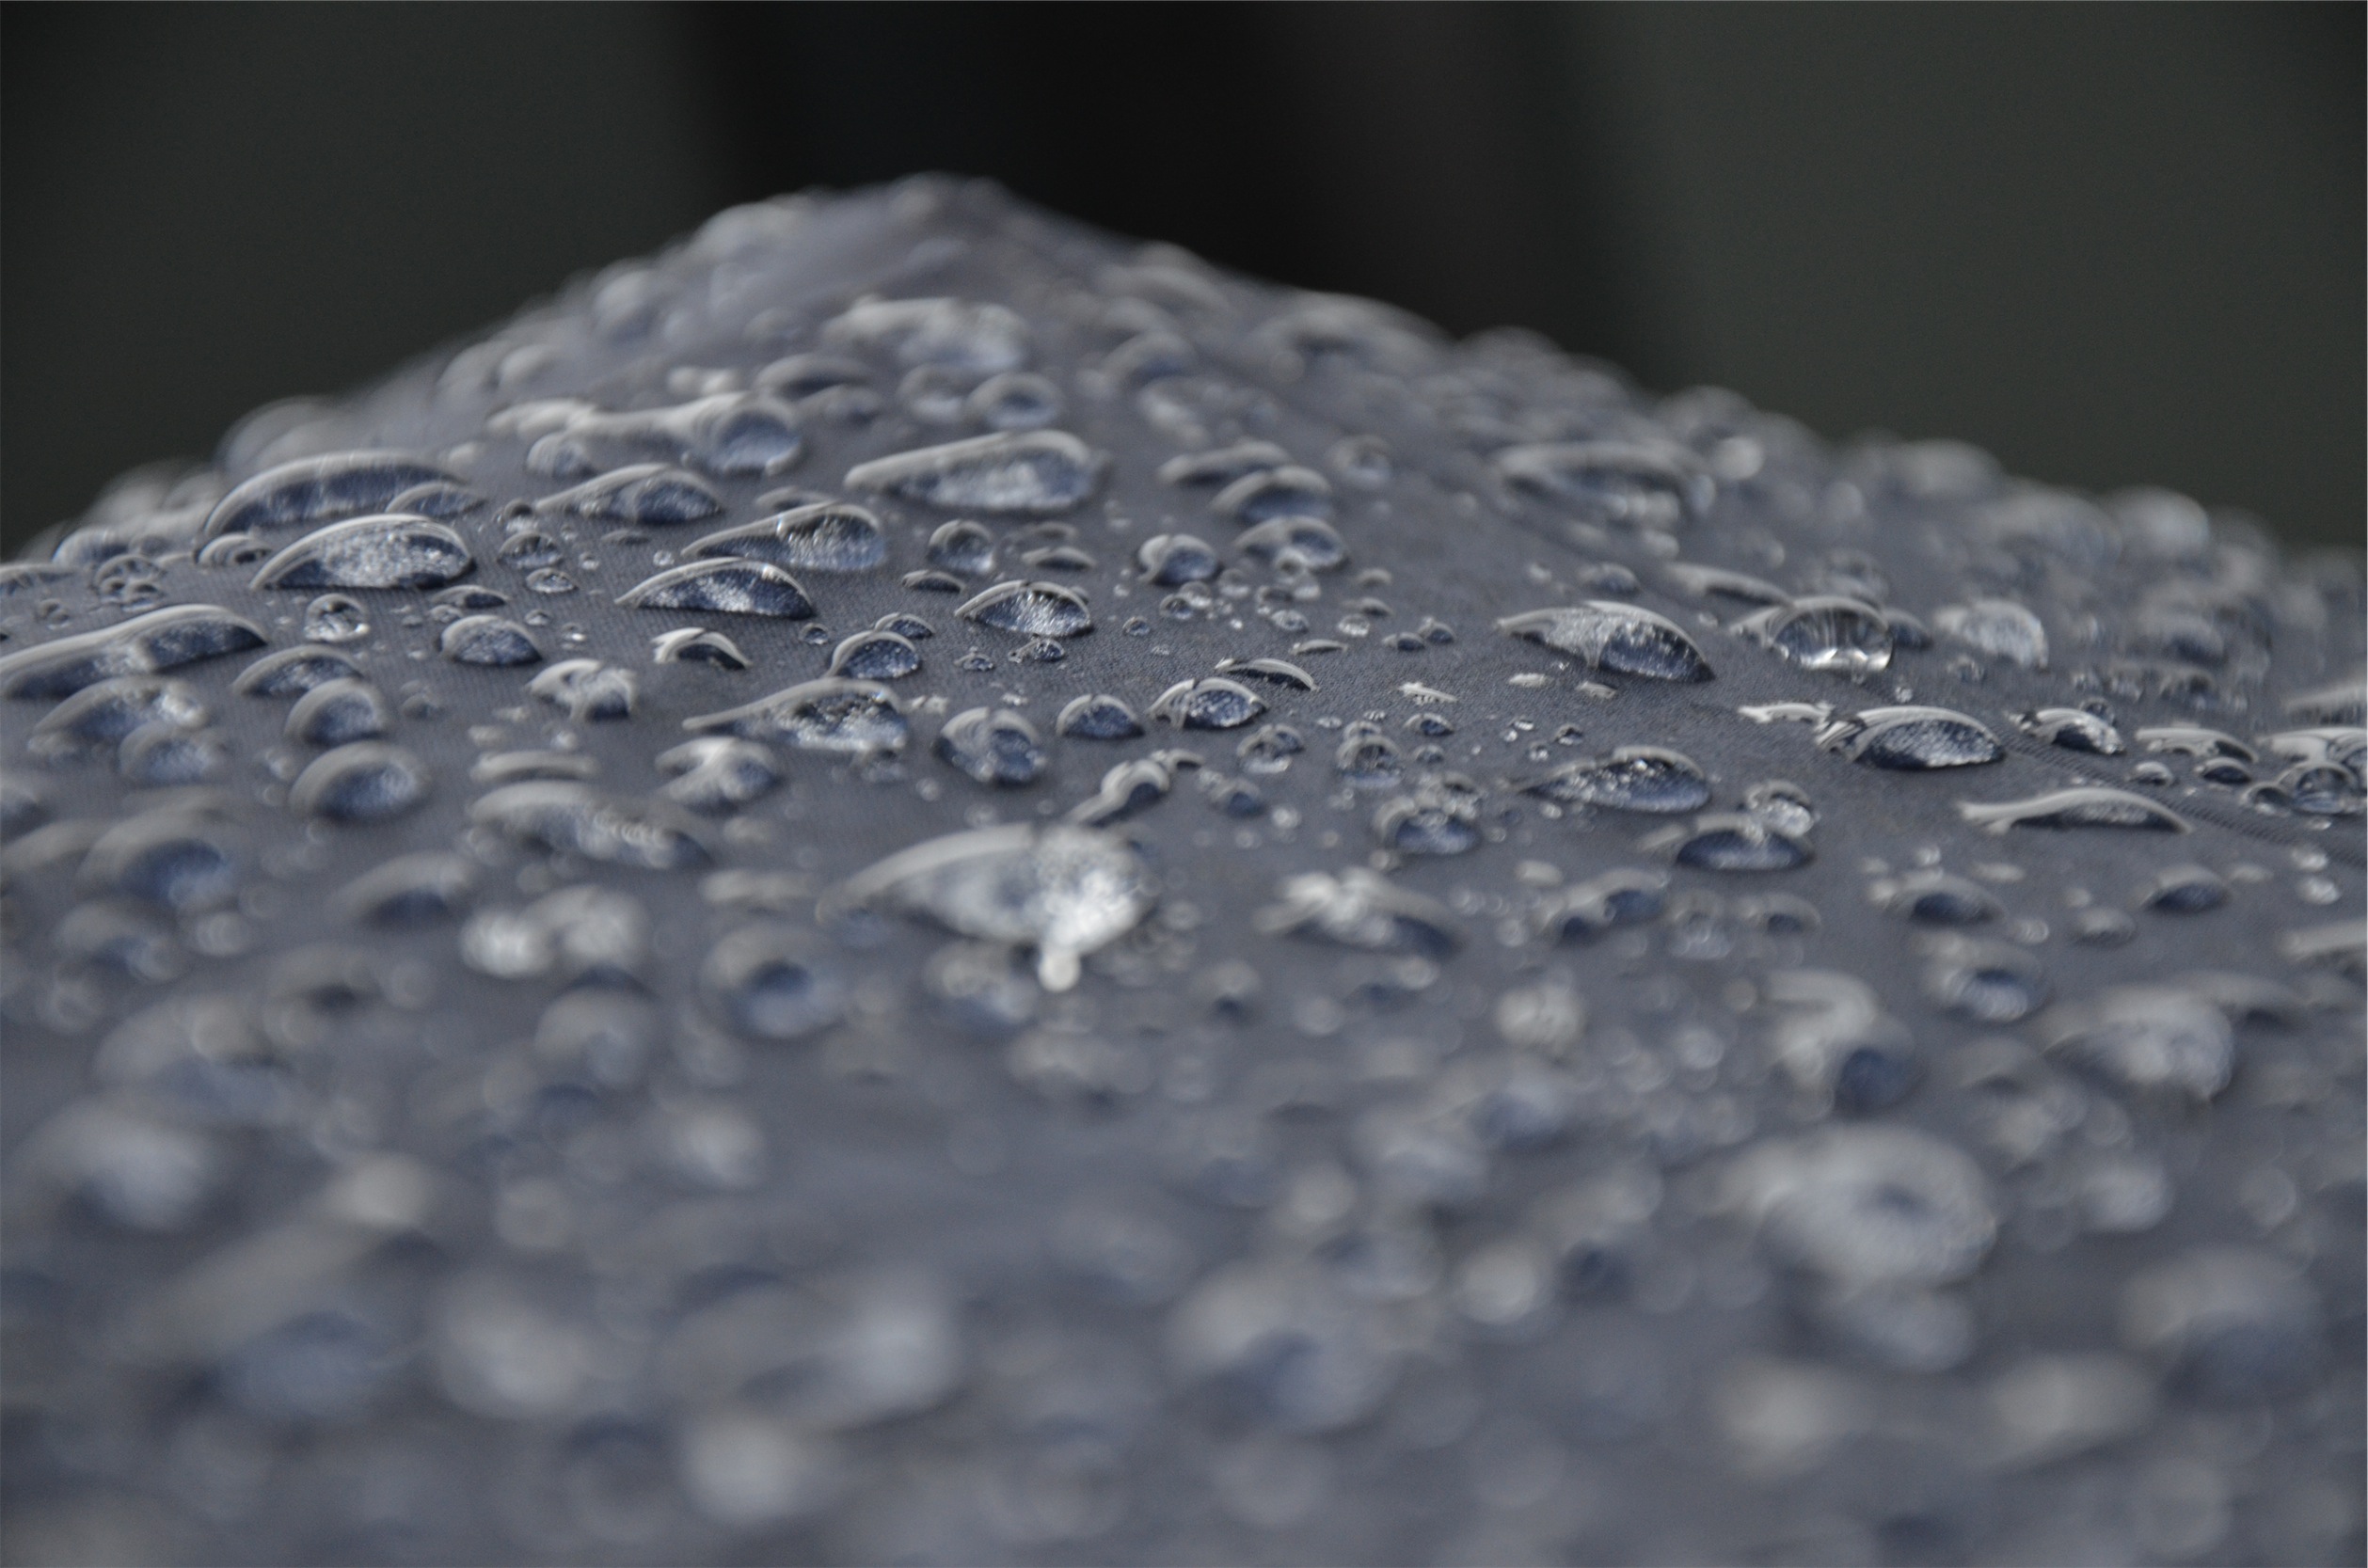 surface with water droplets on it